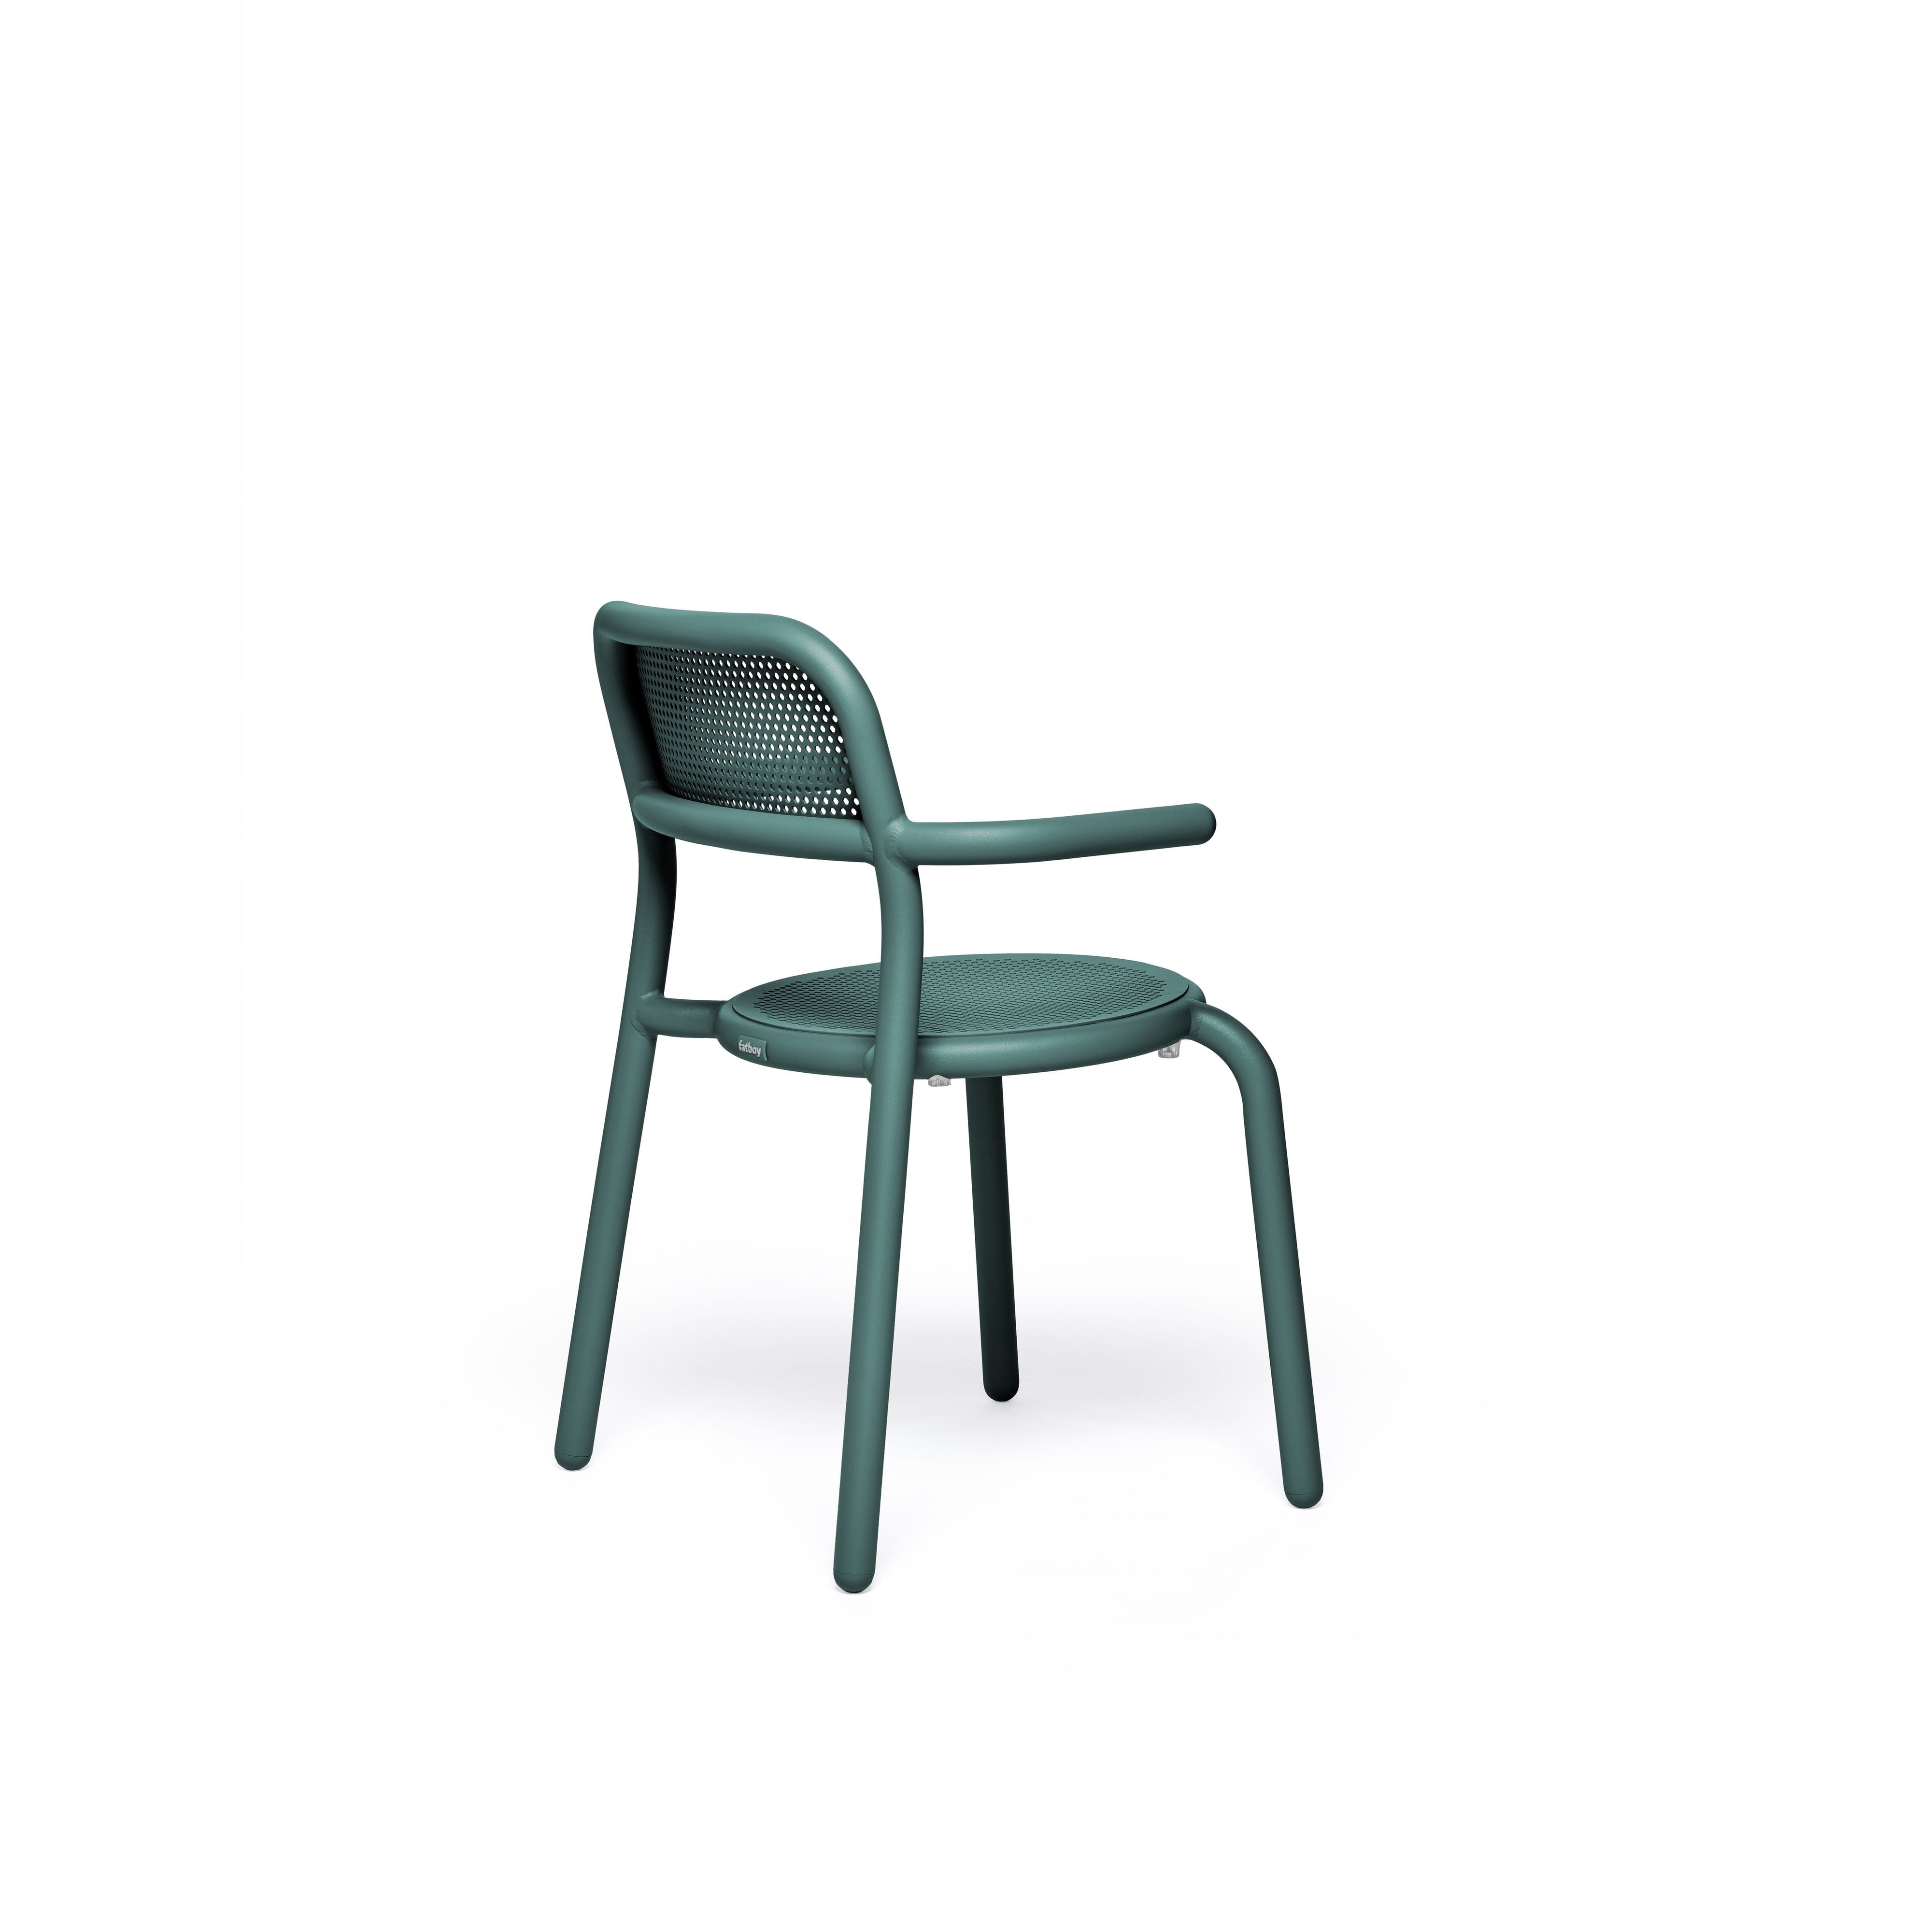 Fatboy Toni fauteuil Pine Green, 2 pc's.